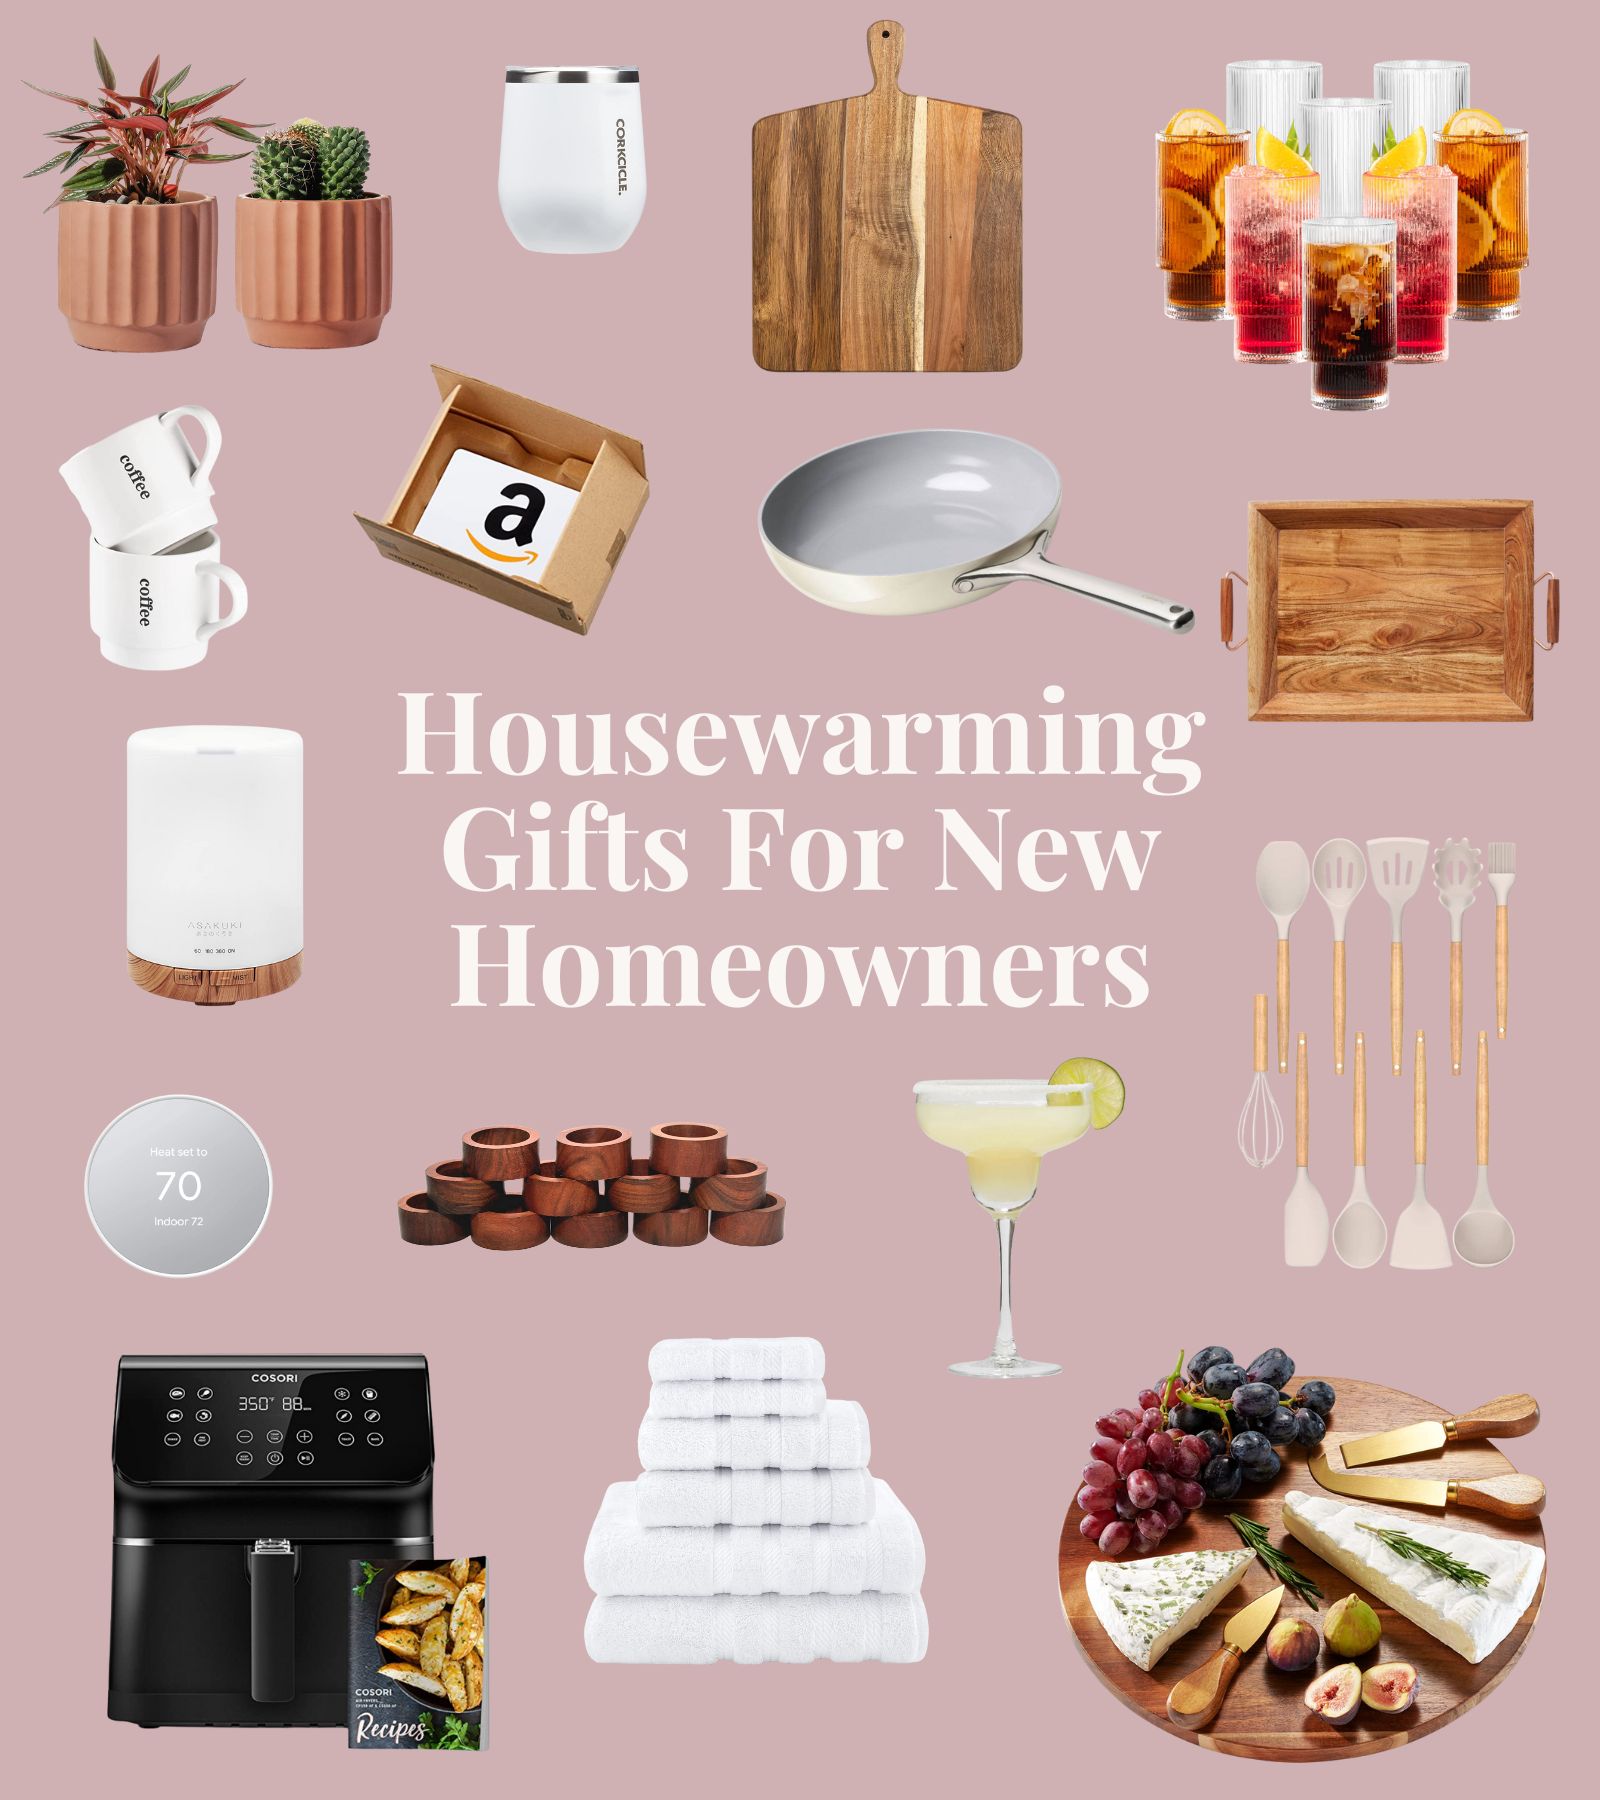 New Home Gifts: Our Best Present Ideas for Everyone - Funky Pigeon Blog